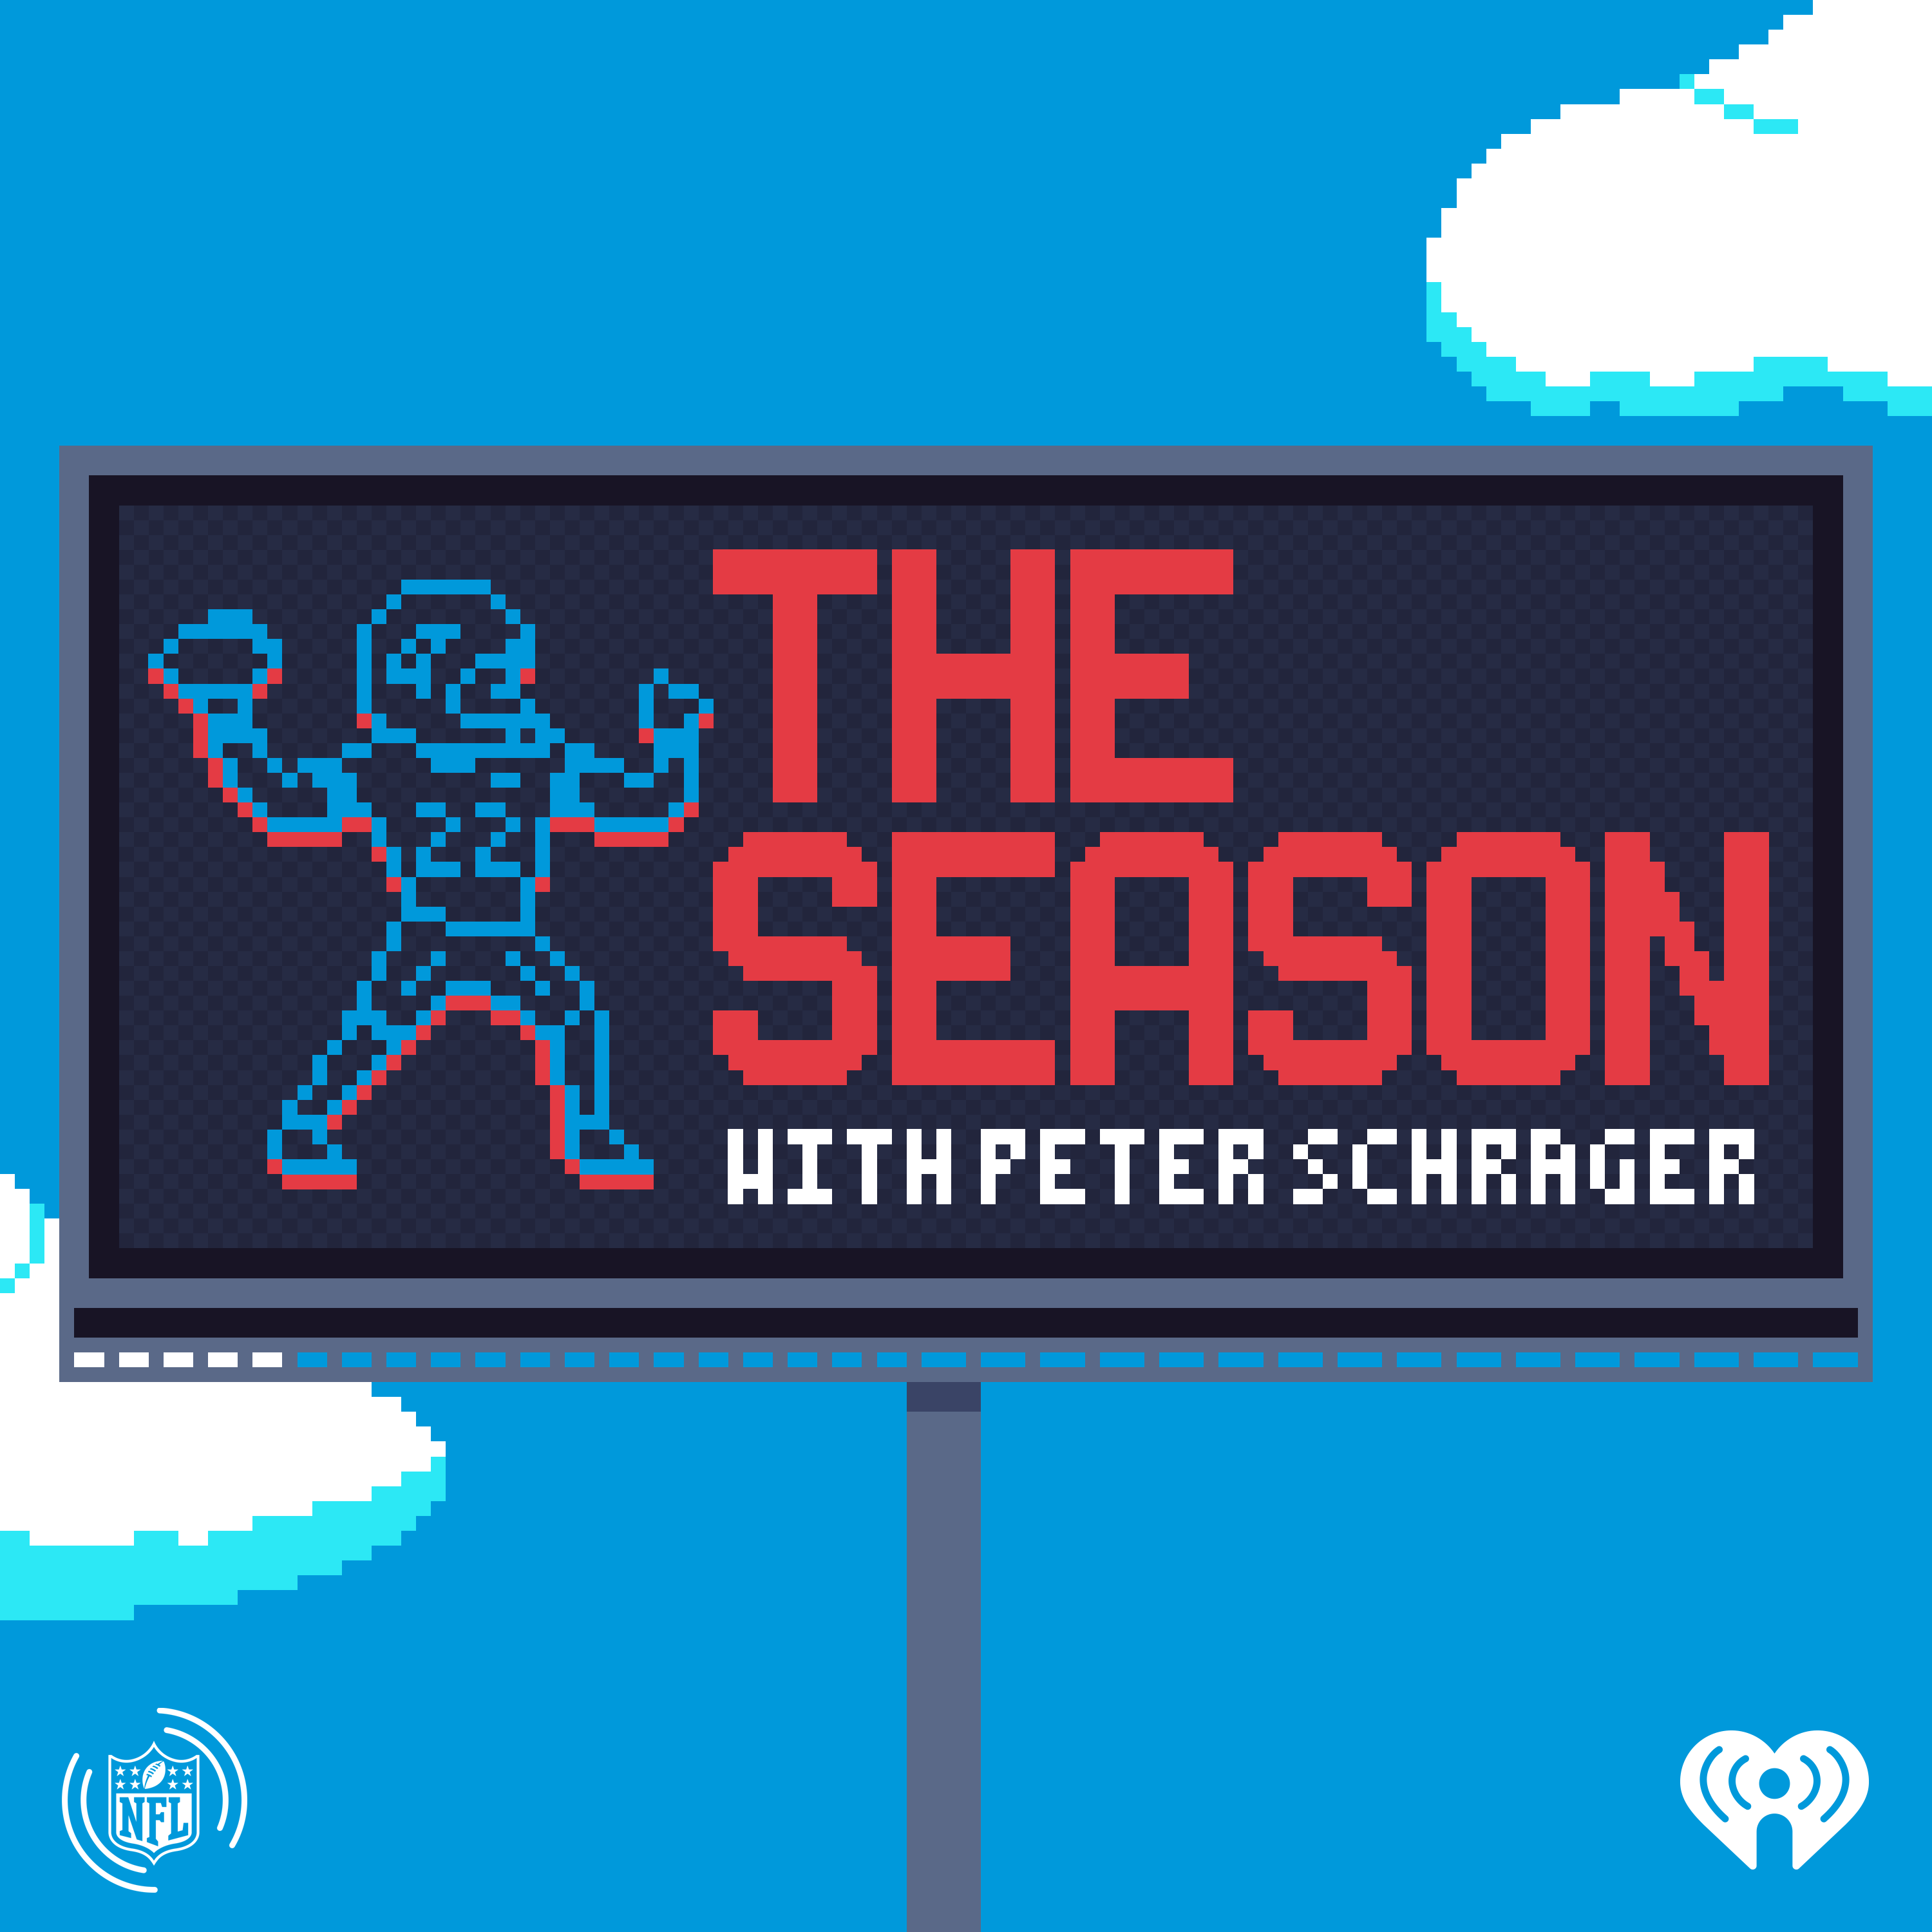 The Season with Peter Schrager: Downright Scary 49ers, Zach Wilson's Brutal Sunday, and Thanksgiving Games with Kevin Burkhardt